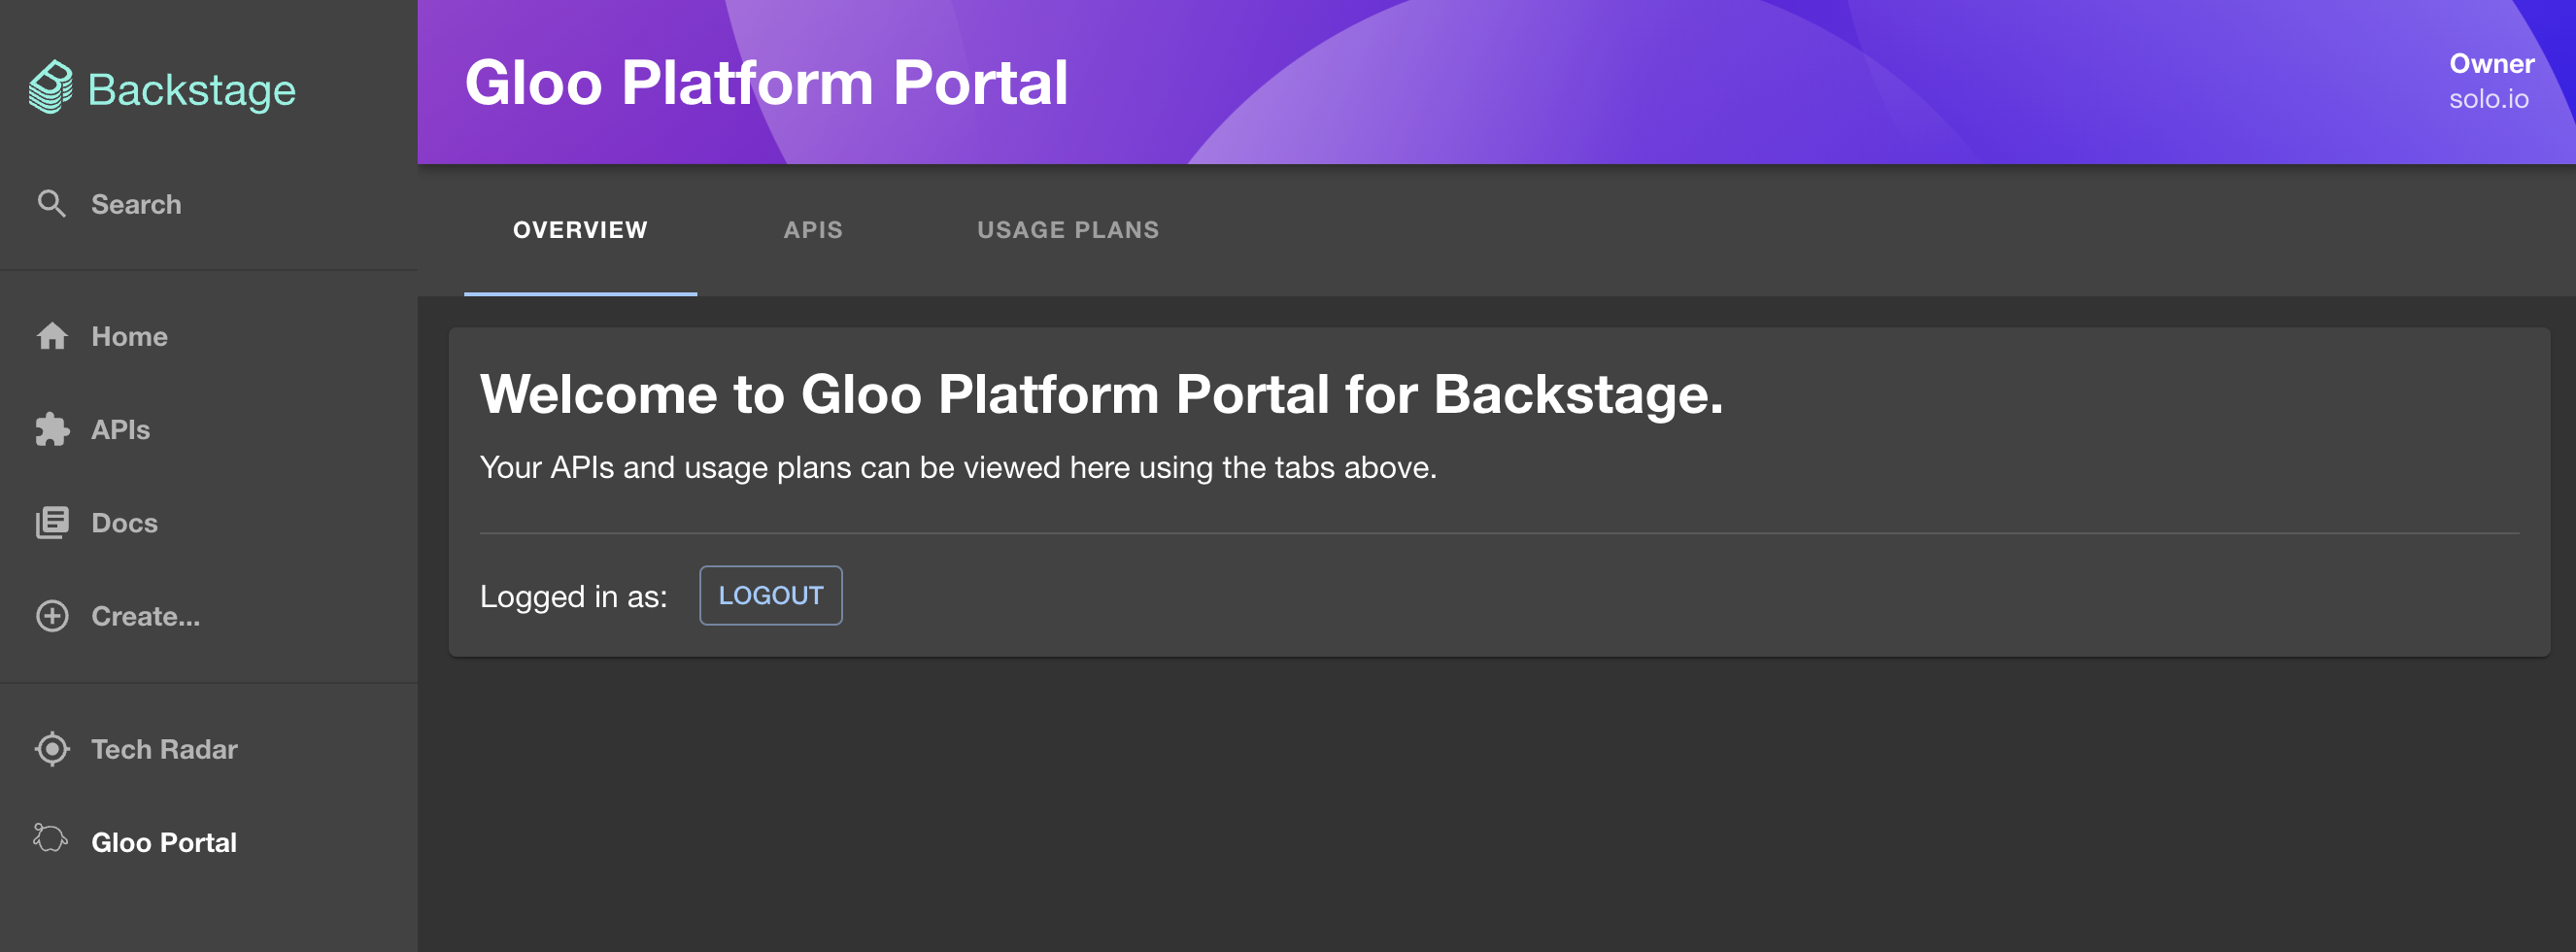 Backstage portal welcome screen